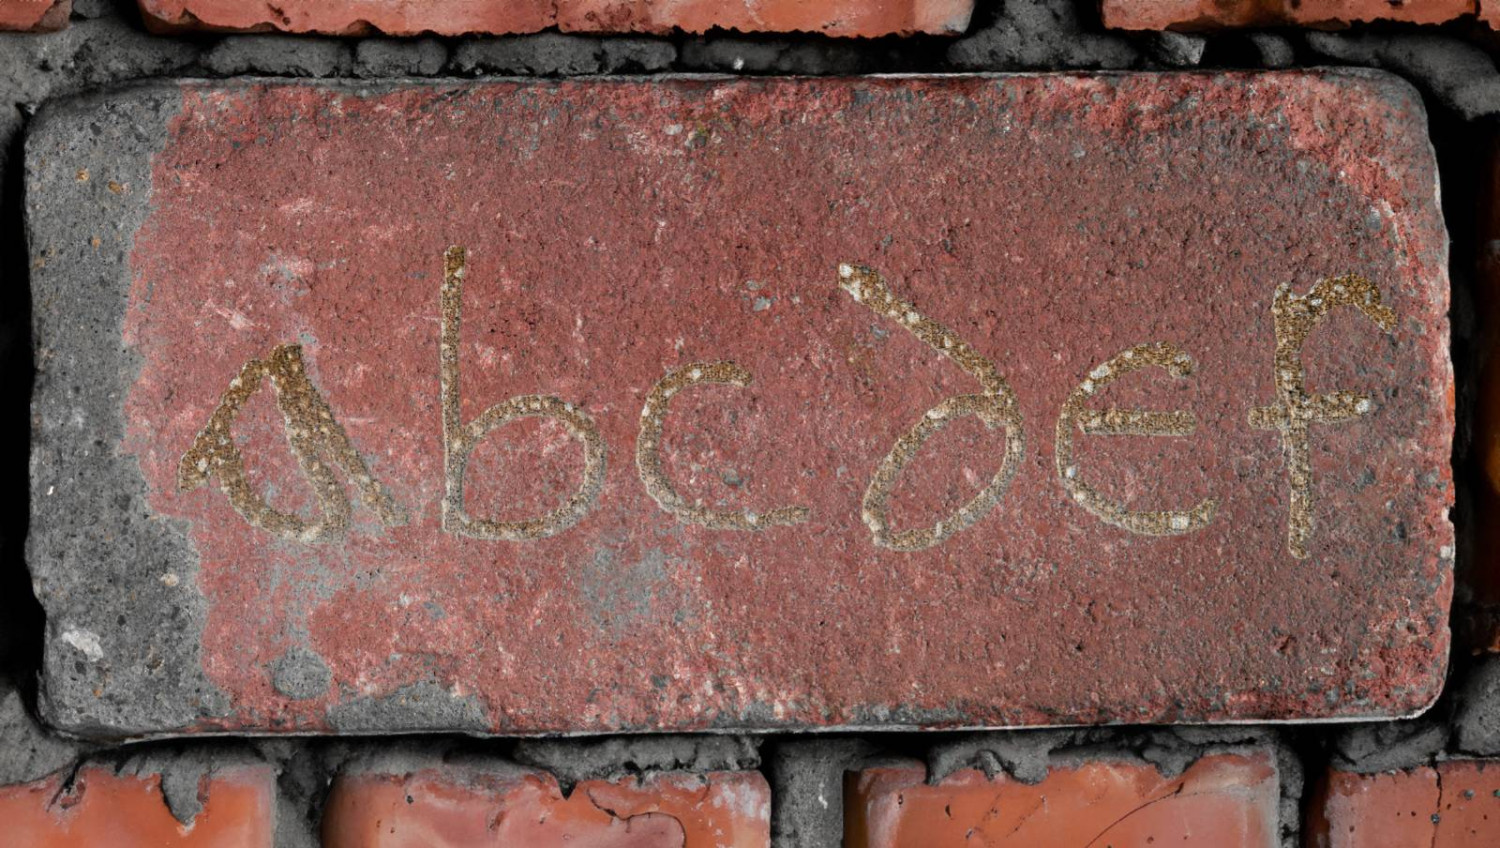 Experiment with laser cutting my Dad's handwriting into a red brick